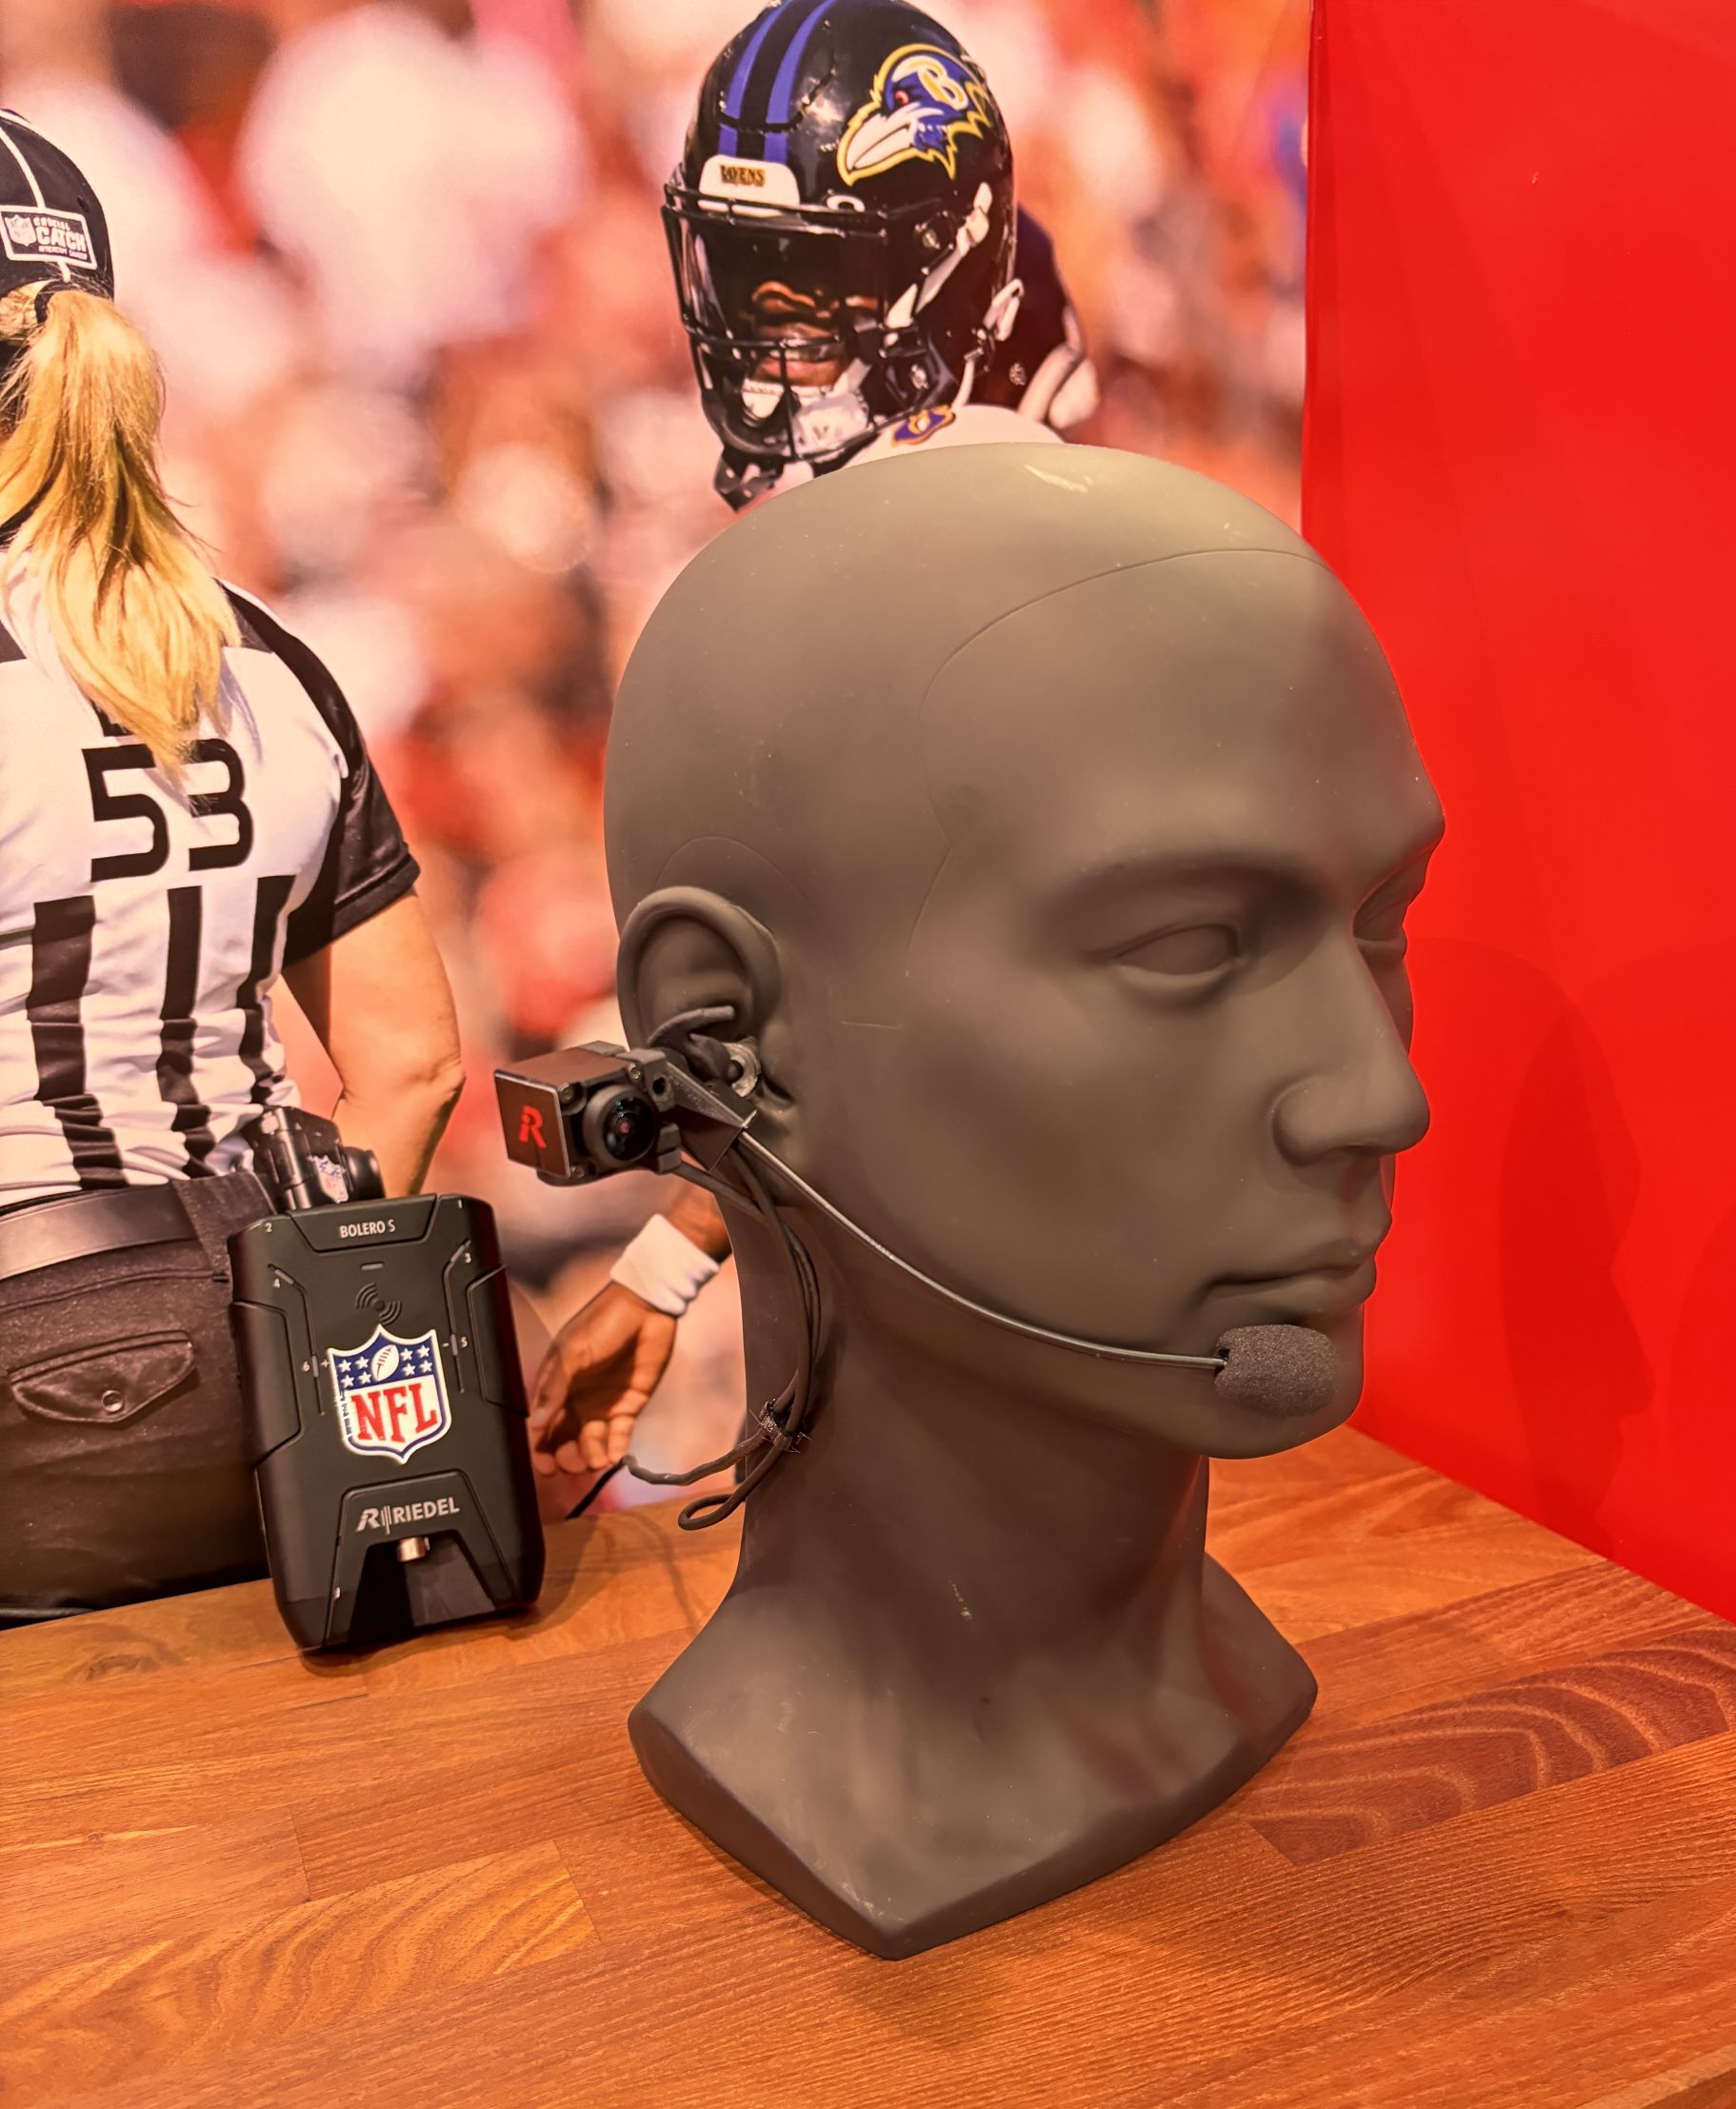 A new headset and cam from Riedel Communications on a dummy's head.